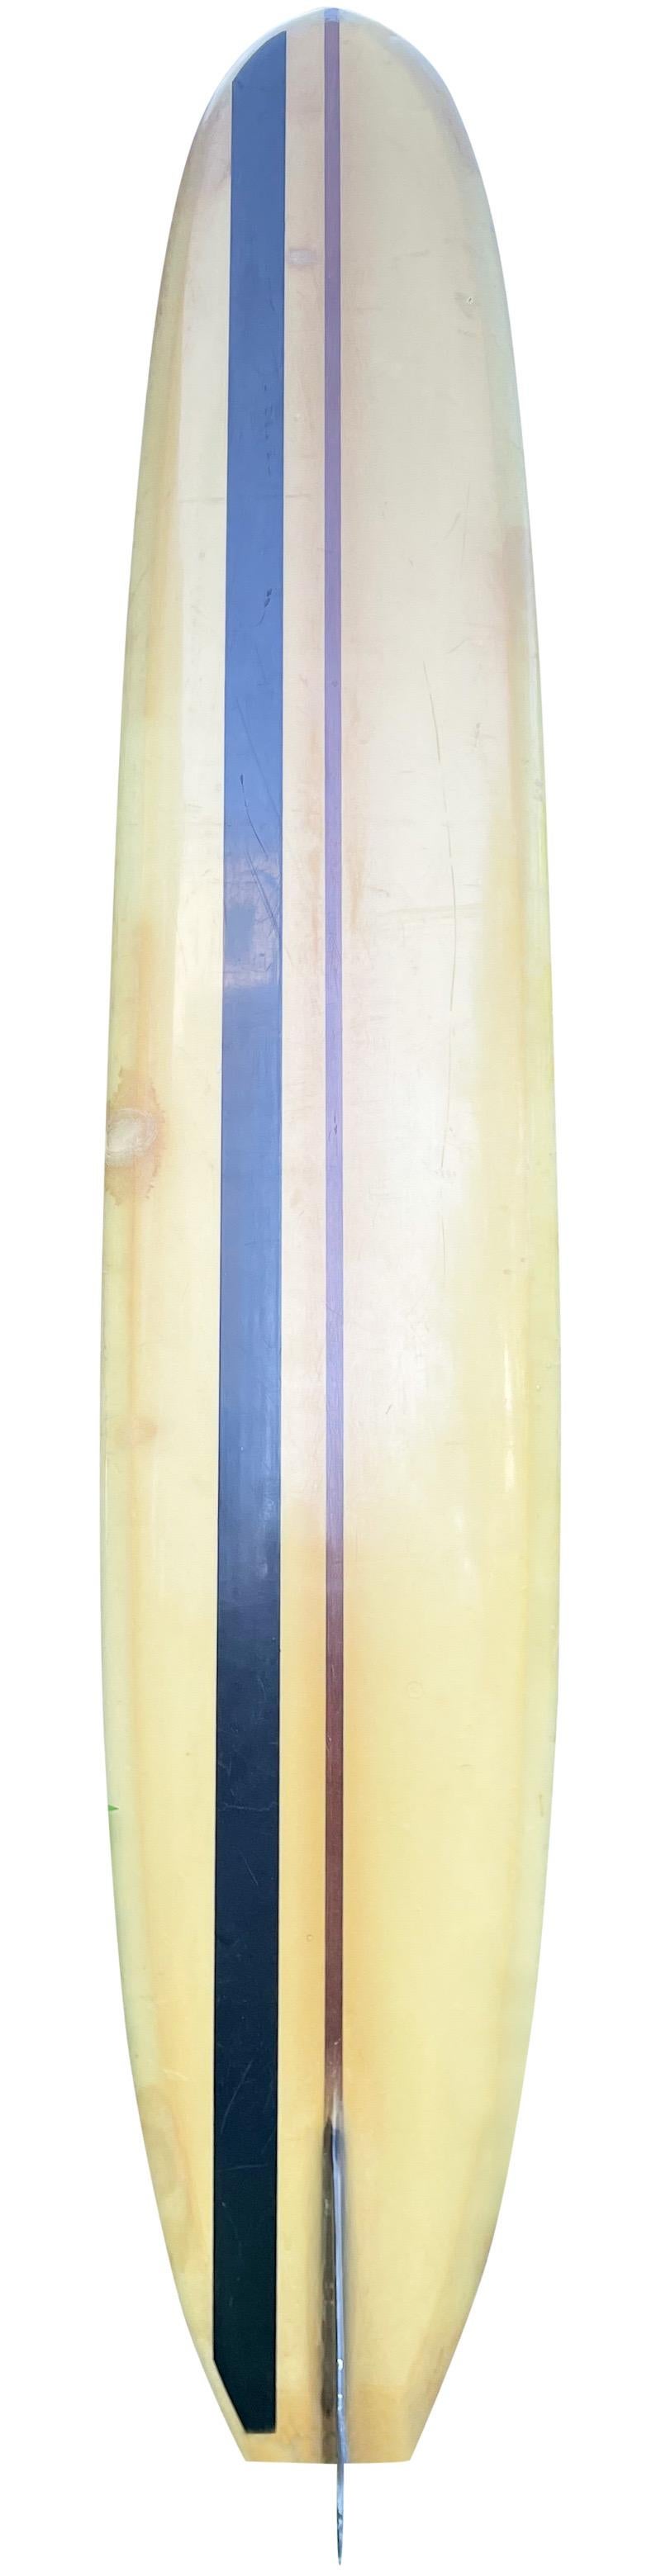 Early-mid 1960s Greg Noll custom longboard. Features a single redwood stringer design with wood tailblock. Black resin stripe with complimentary black single fin. Hand signed by Greg Noll in 1999. One of the most acclaimed big wave surfing legends